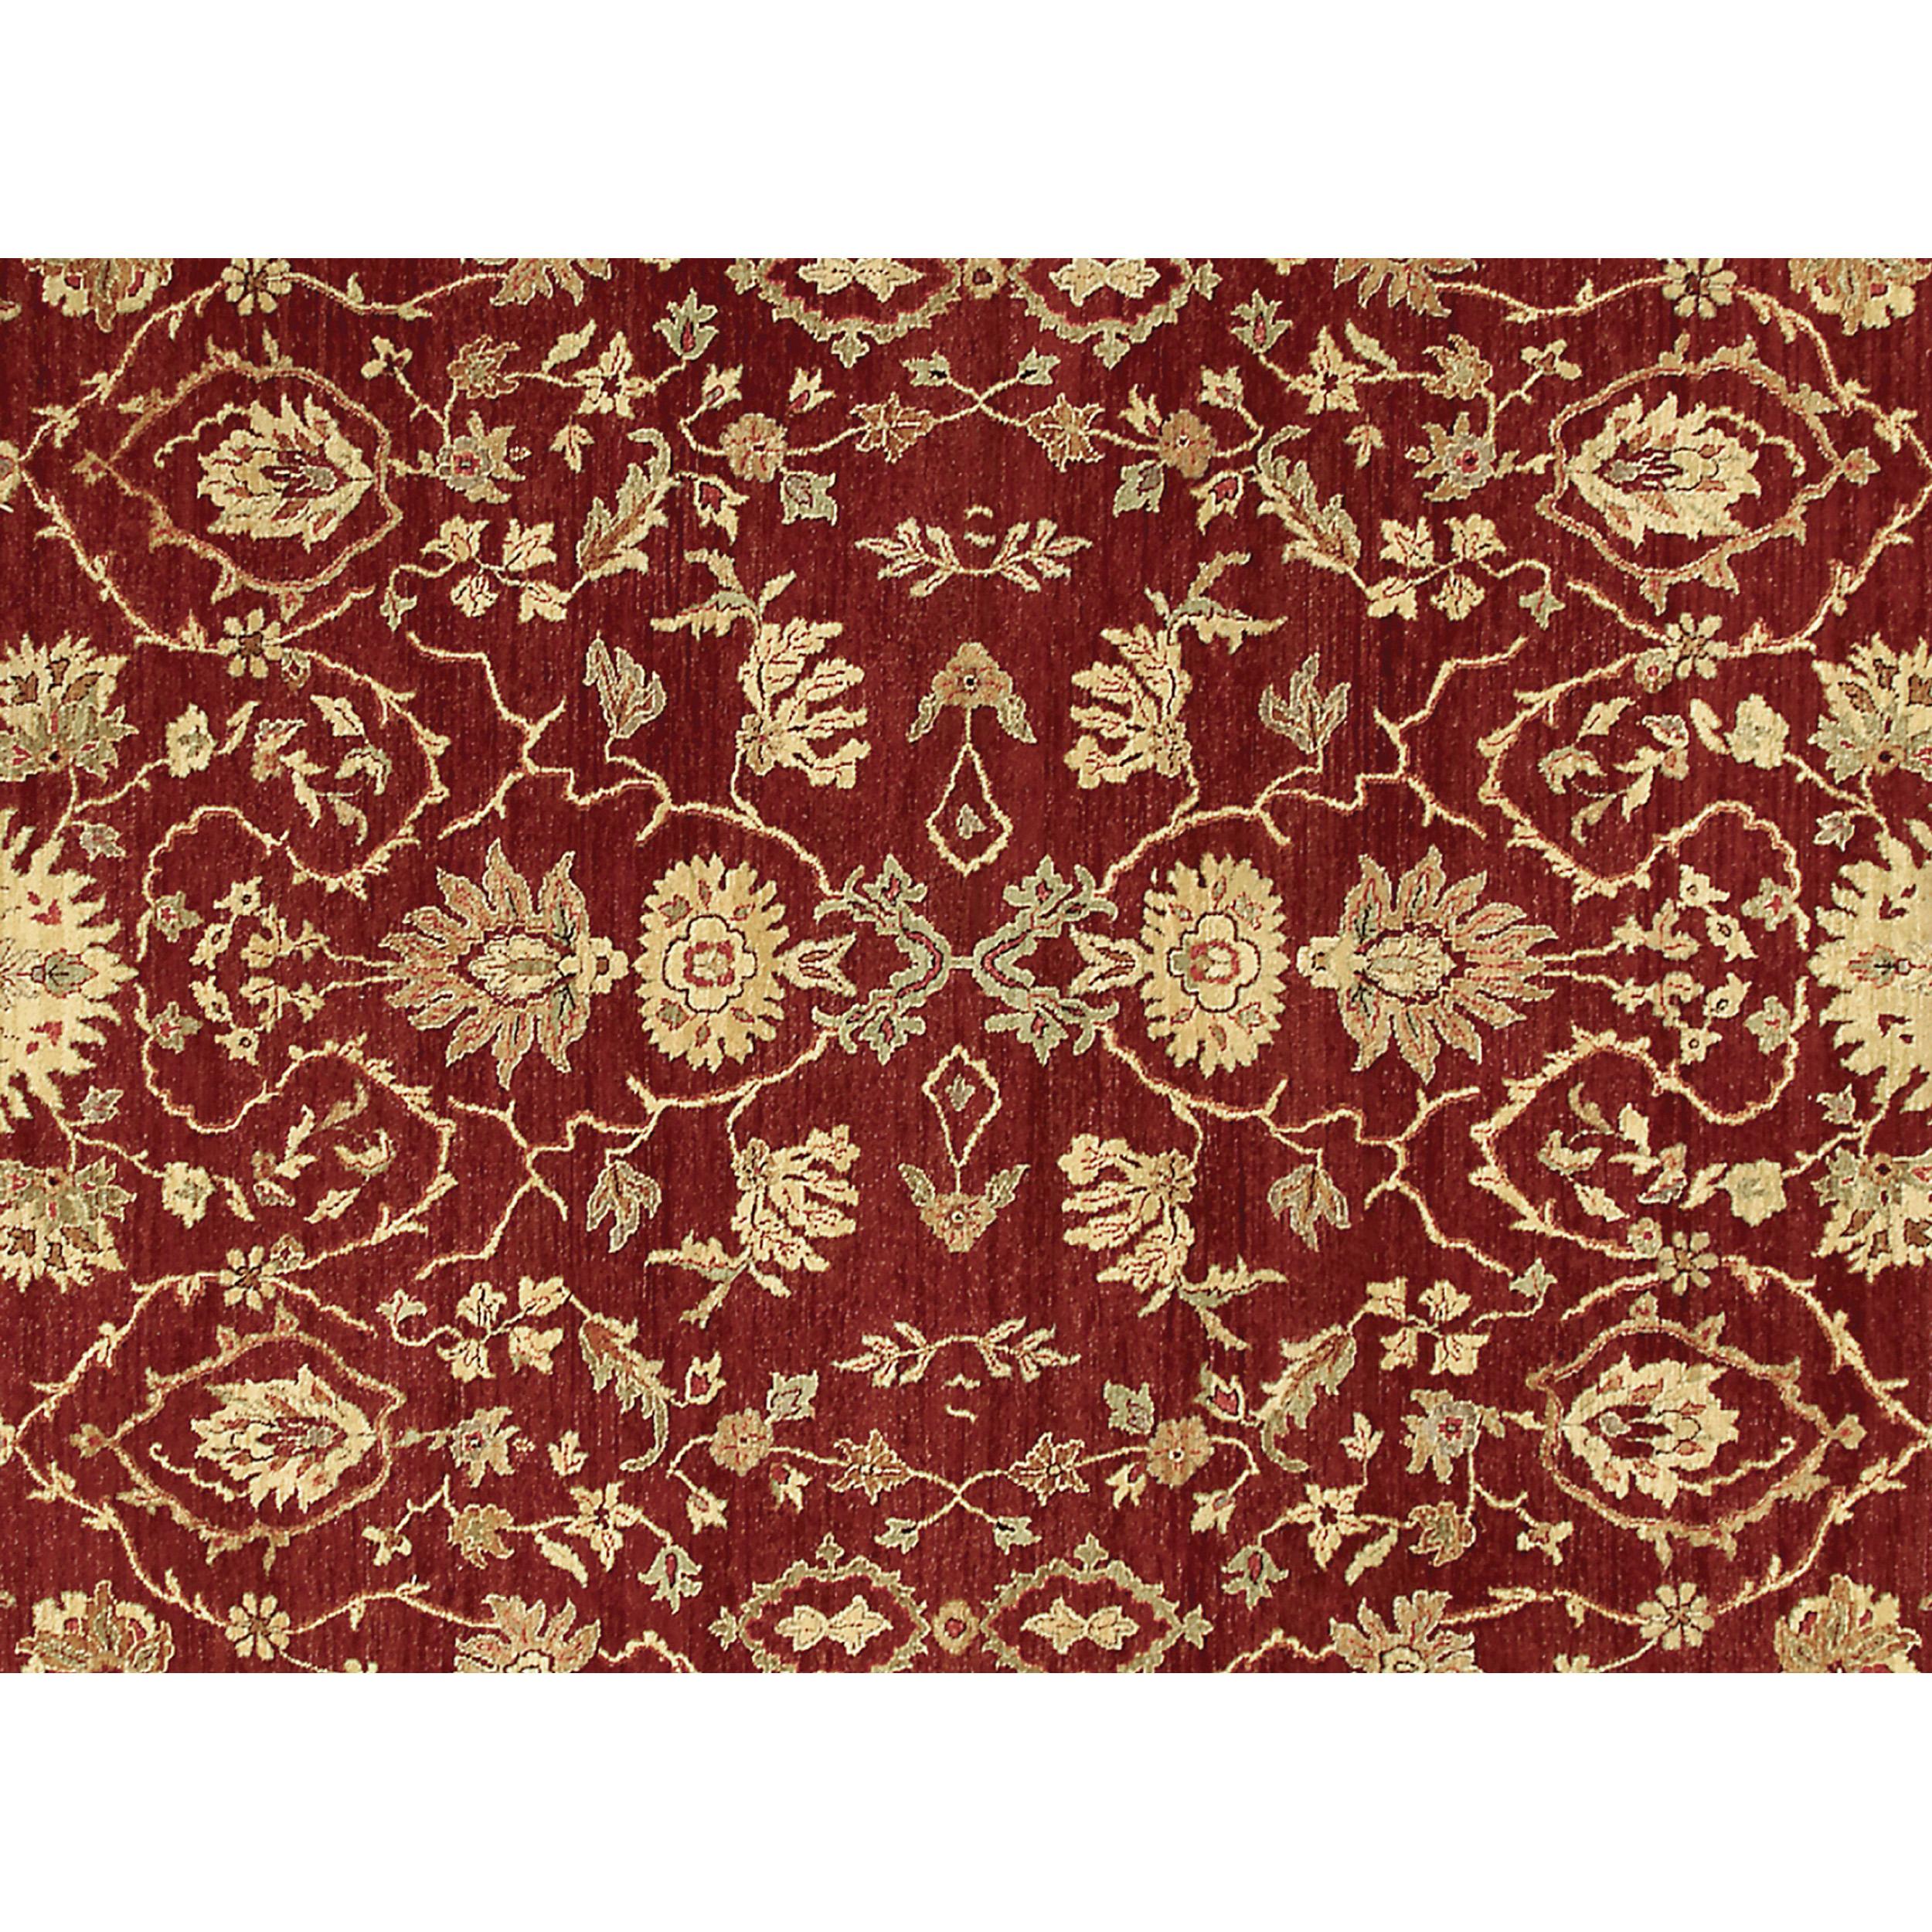 Agra Luxury Traditional Hand-Knotted Garnet/Soft Gold 12X24 Rug For Sale